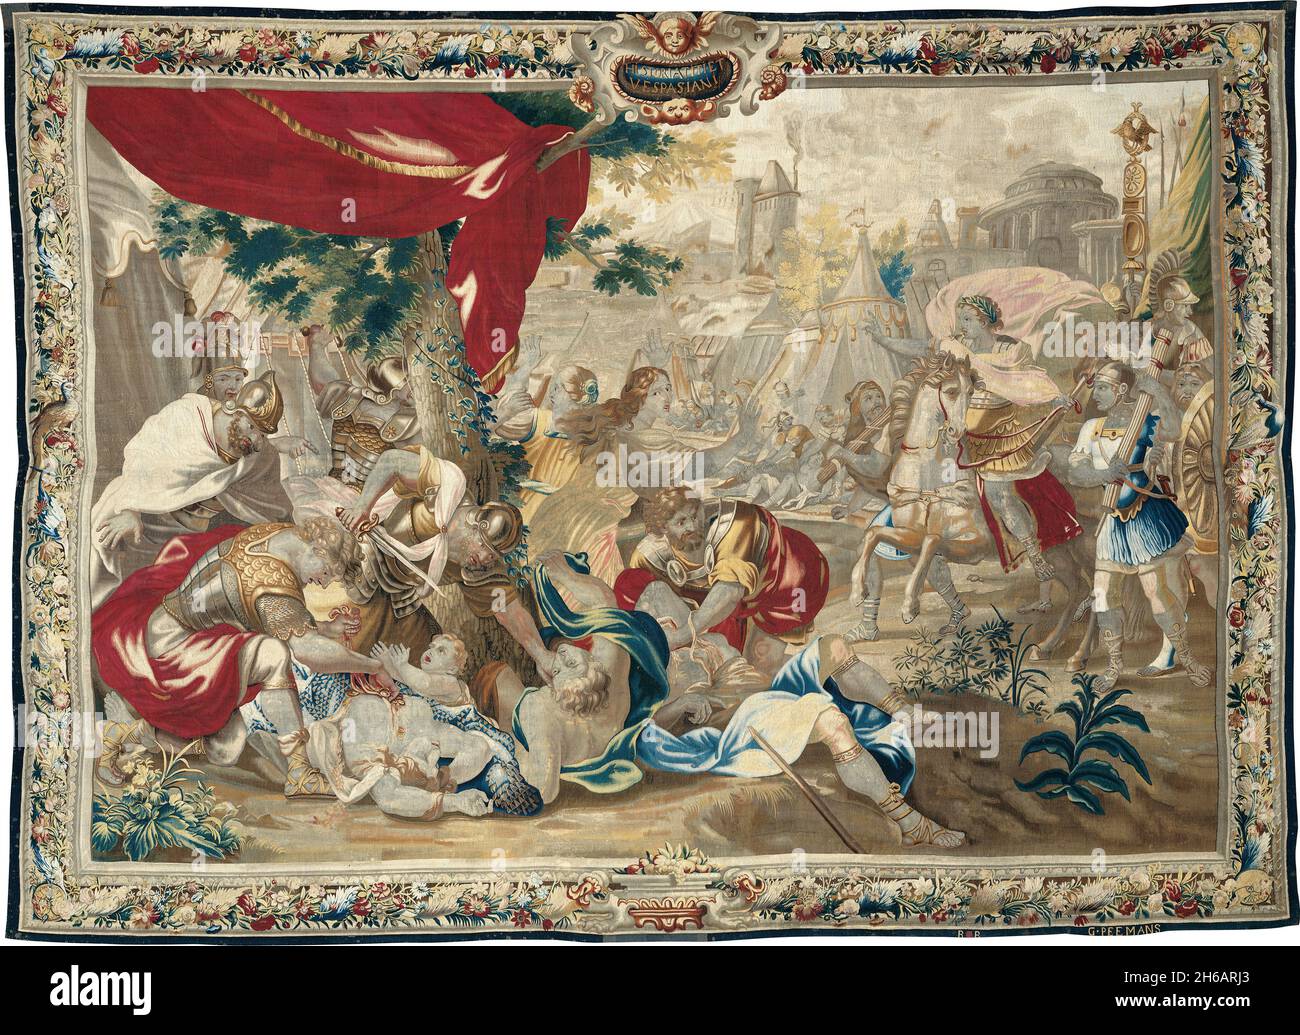 The Massacre at Jerusalem, from The Story of Titus and Vespasian, Brussels, 1650/75. Woven at the workshop of Gerard Peemans, after a design by Charles Poerson. Stock Photo